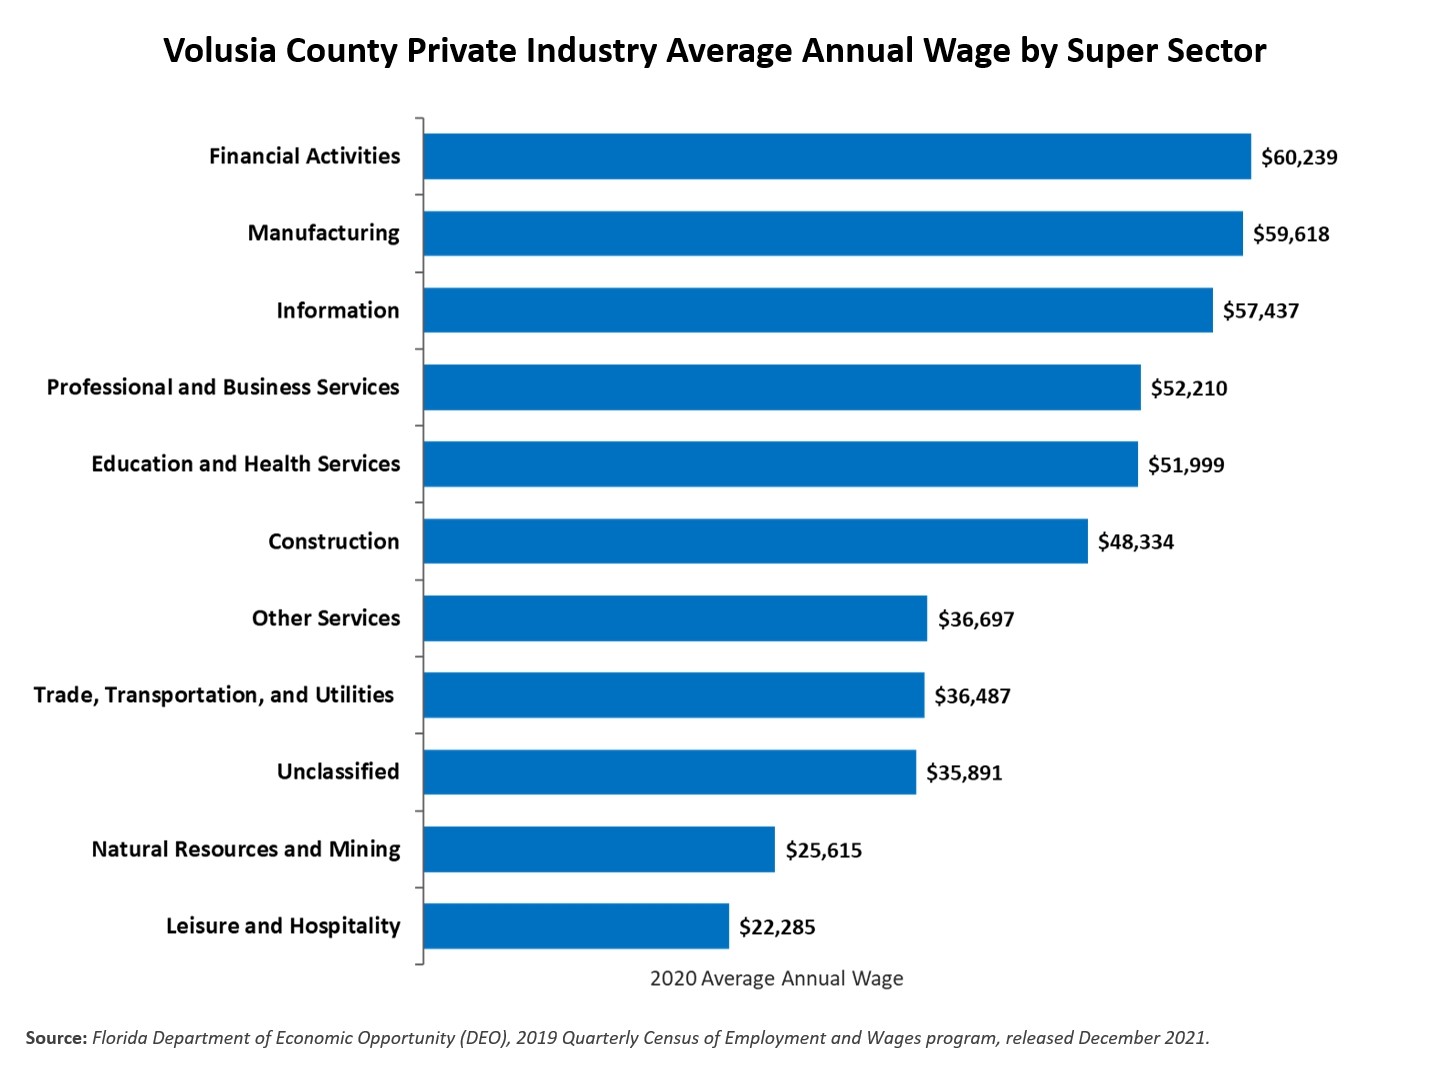 Volusia County Private Industry Average Wage by Super Sector chart